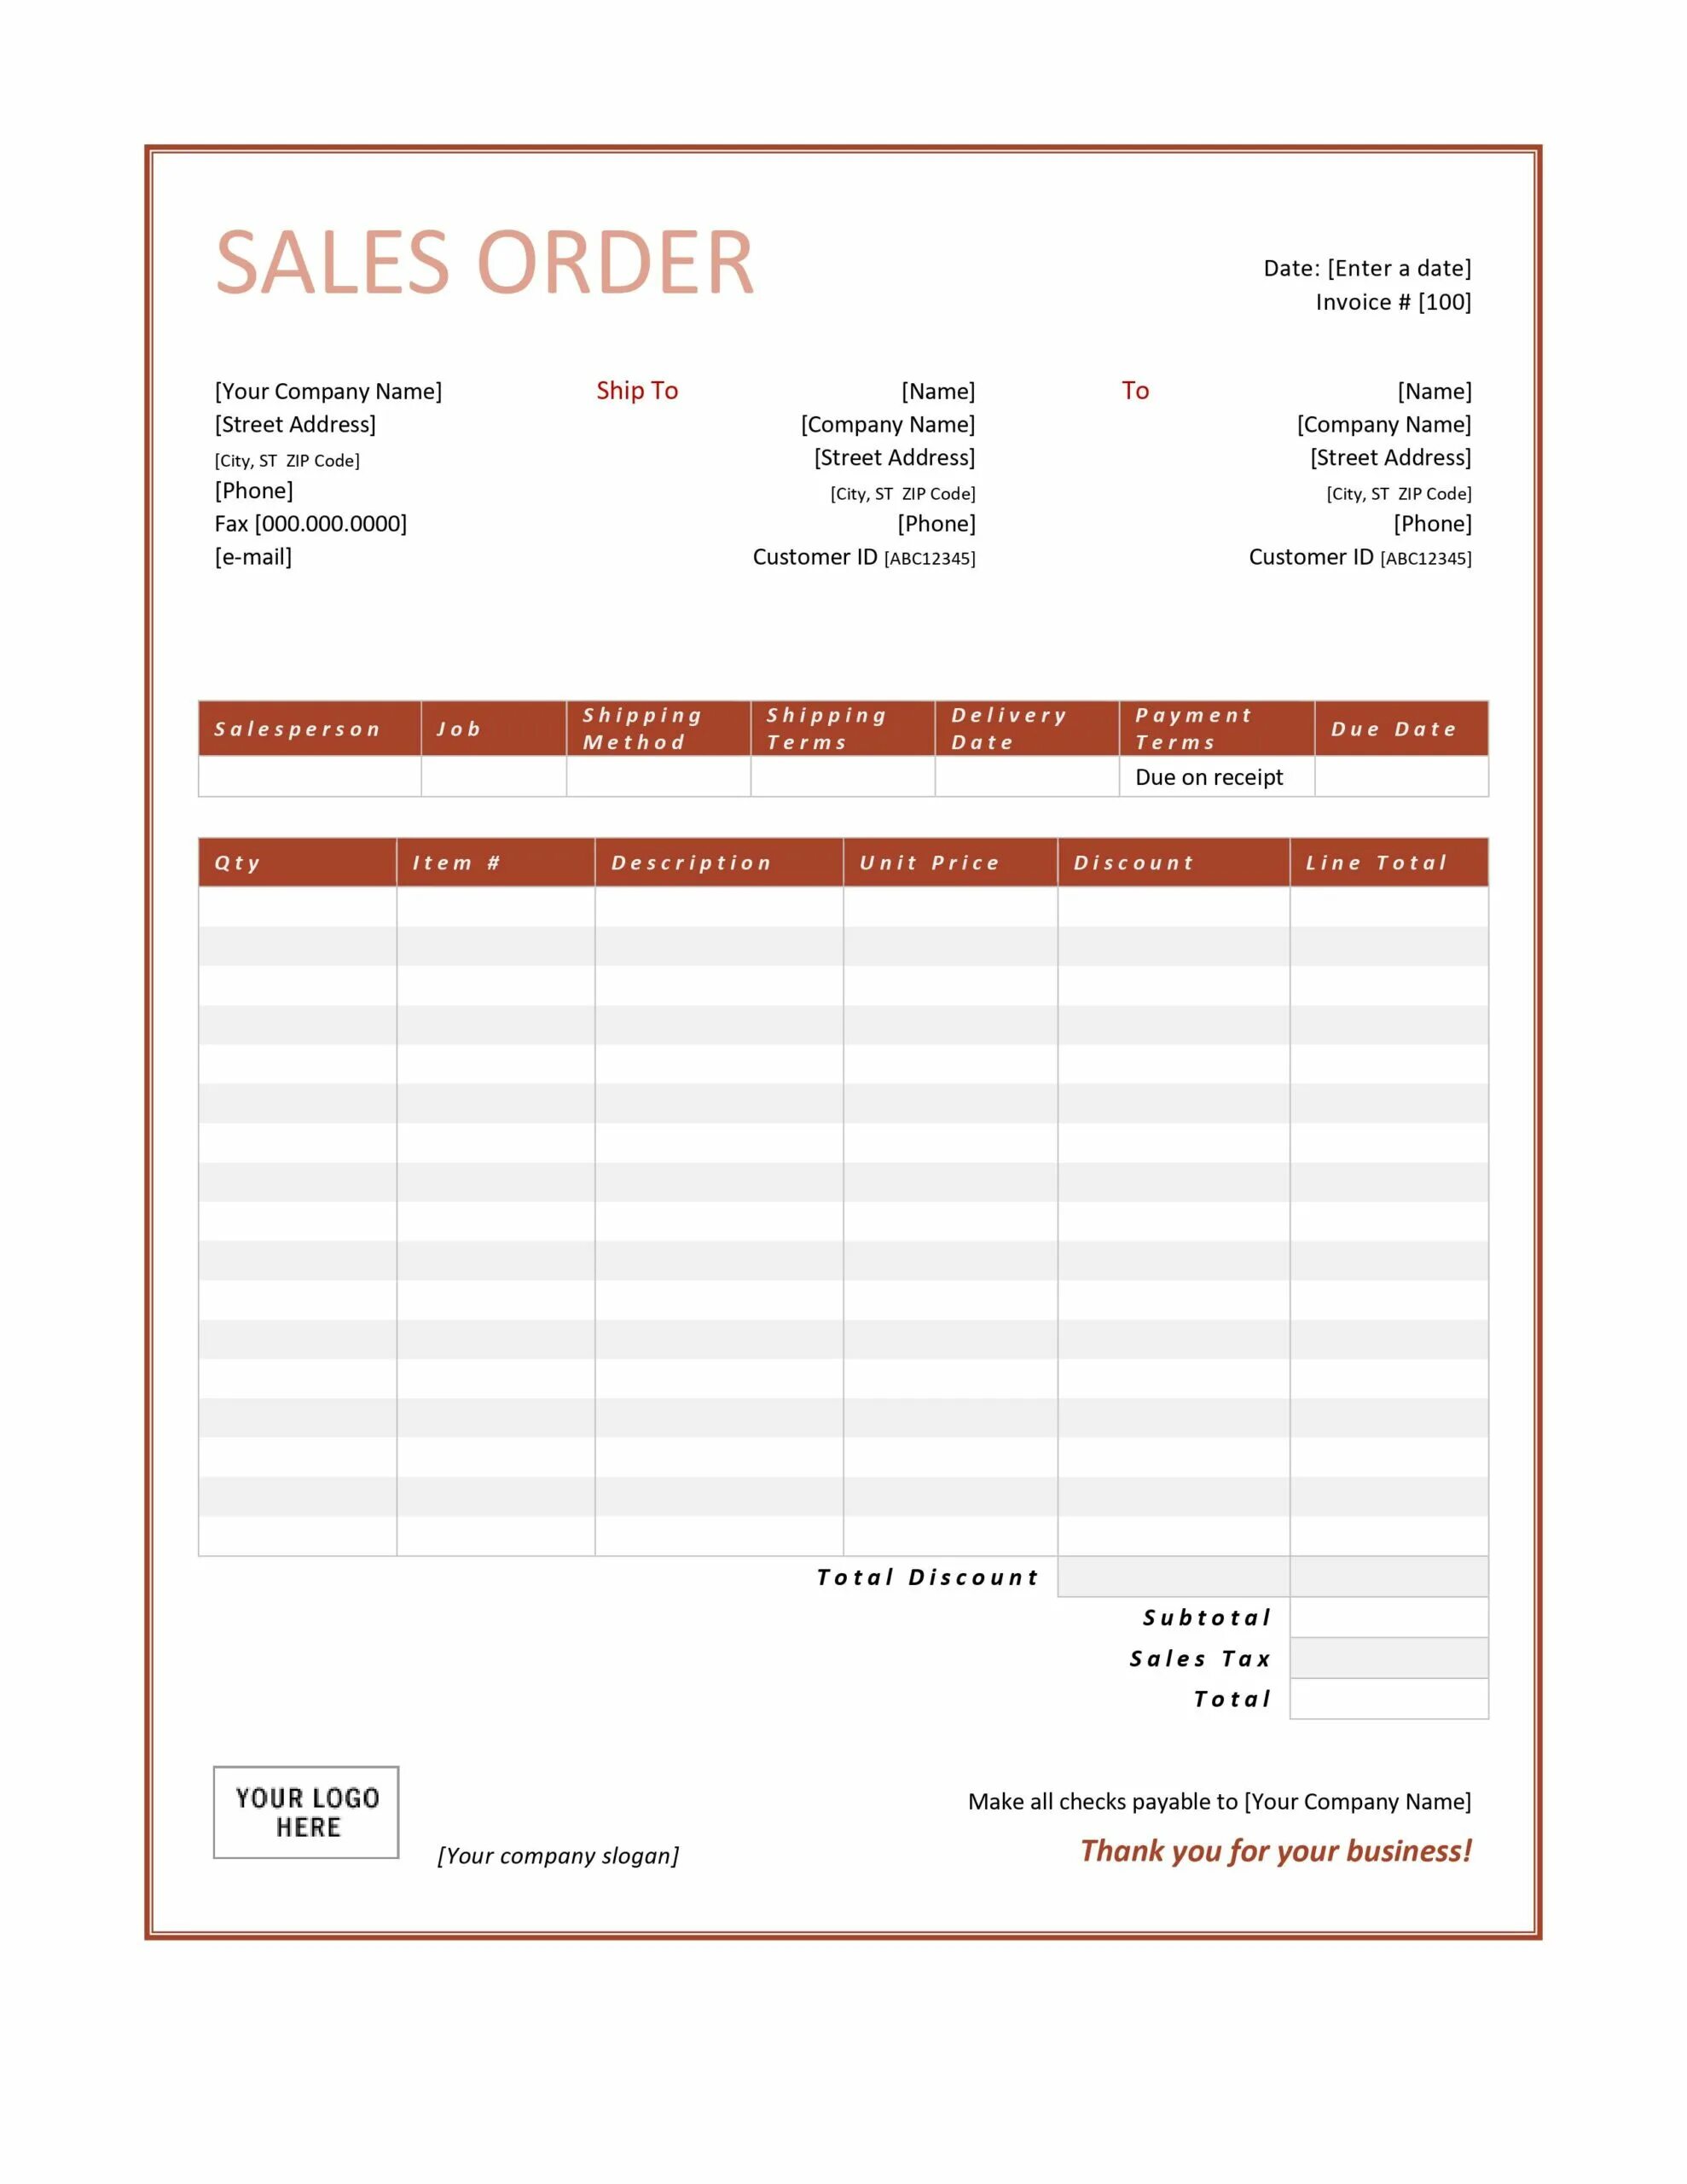 Sales order. Perfect order Template логистика. Order form for Production.